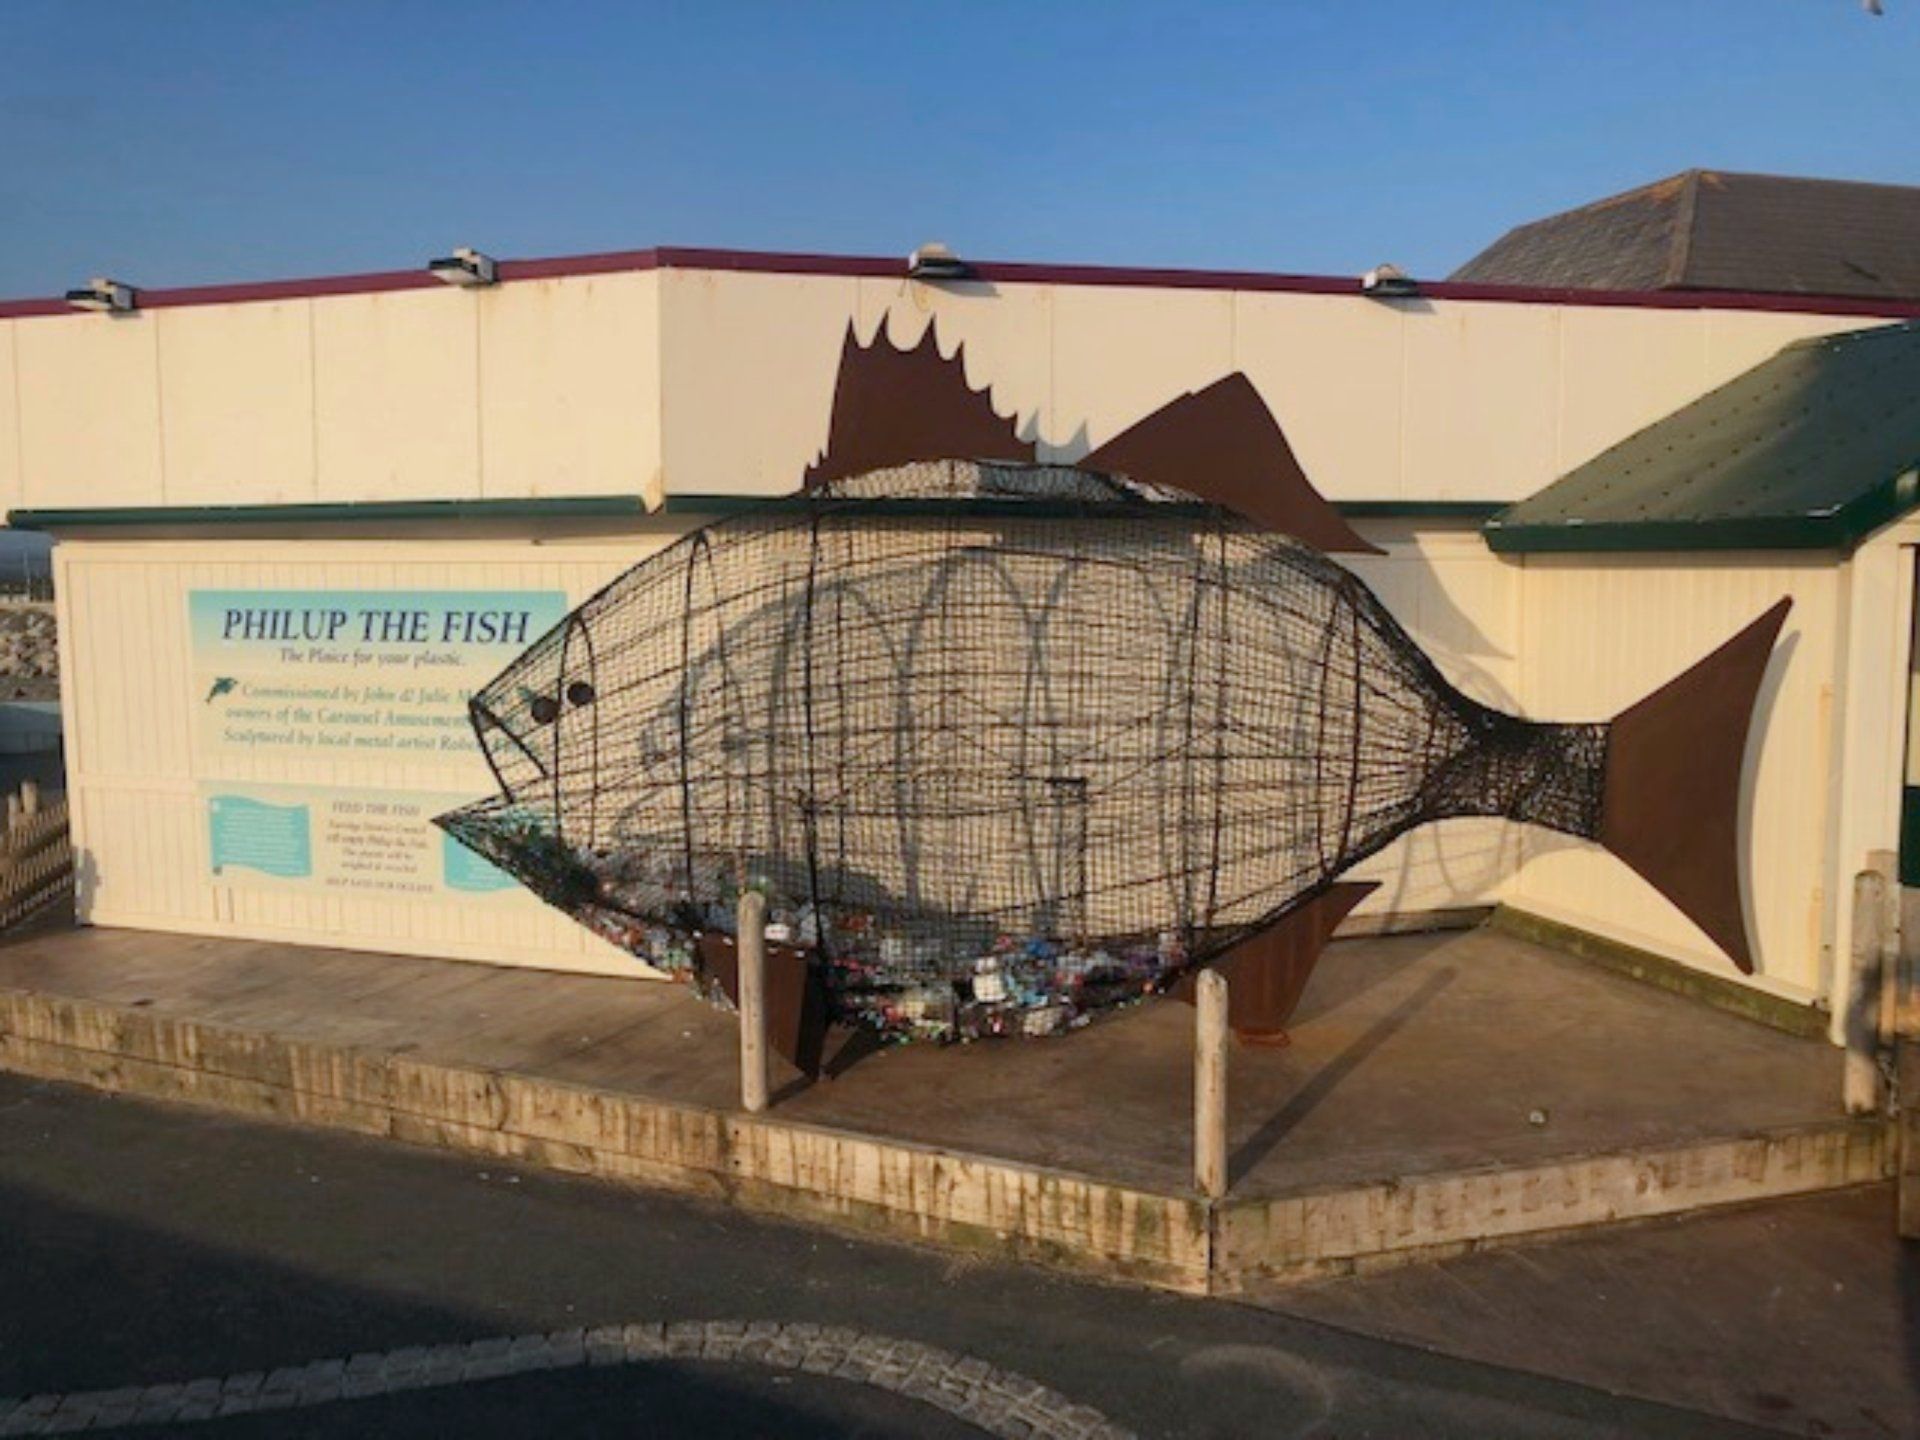 Phillup the fish is for plastic to be recycled and in westward ho! by the carousel amusements